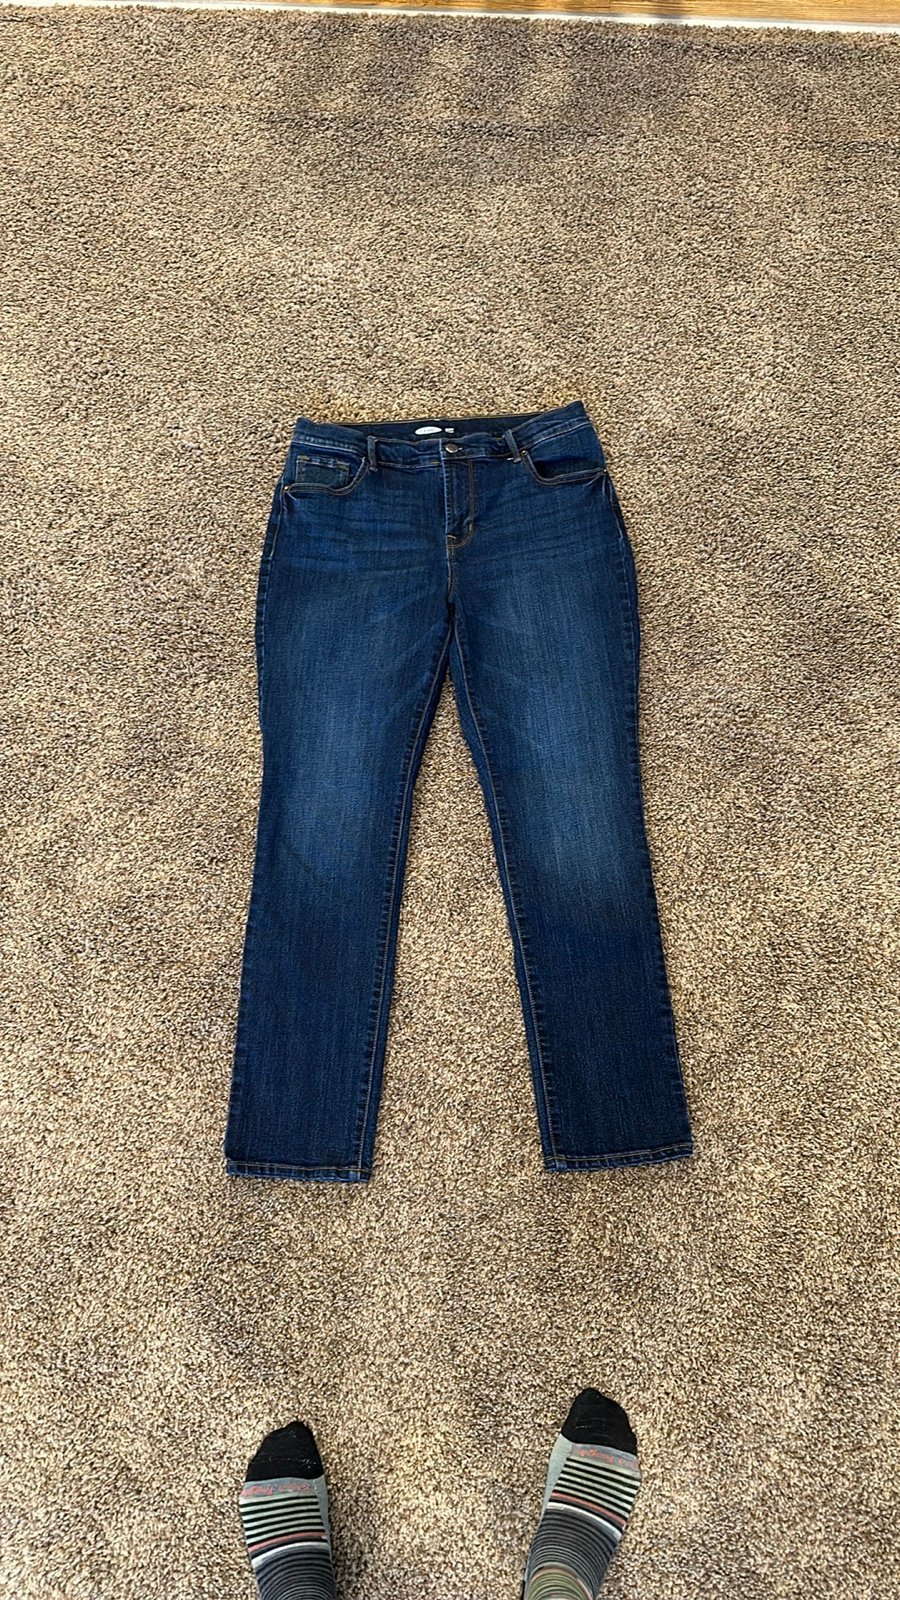 Popular Old Navy curvy straight jeans size 8 short o9lAw4kMp outlet online shop